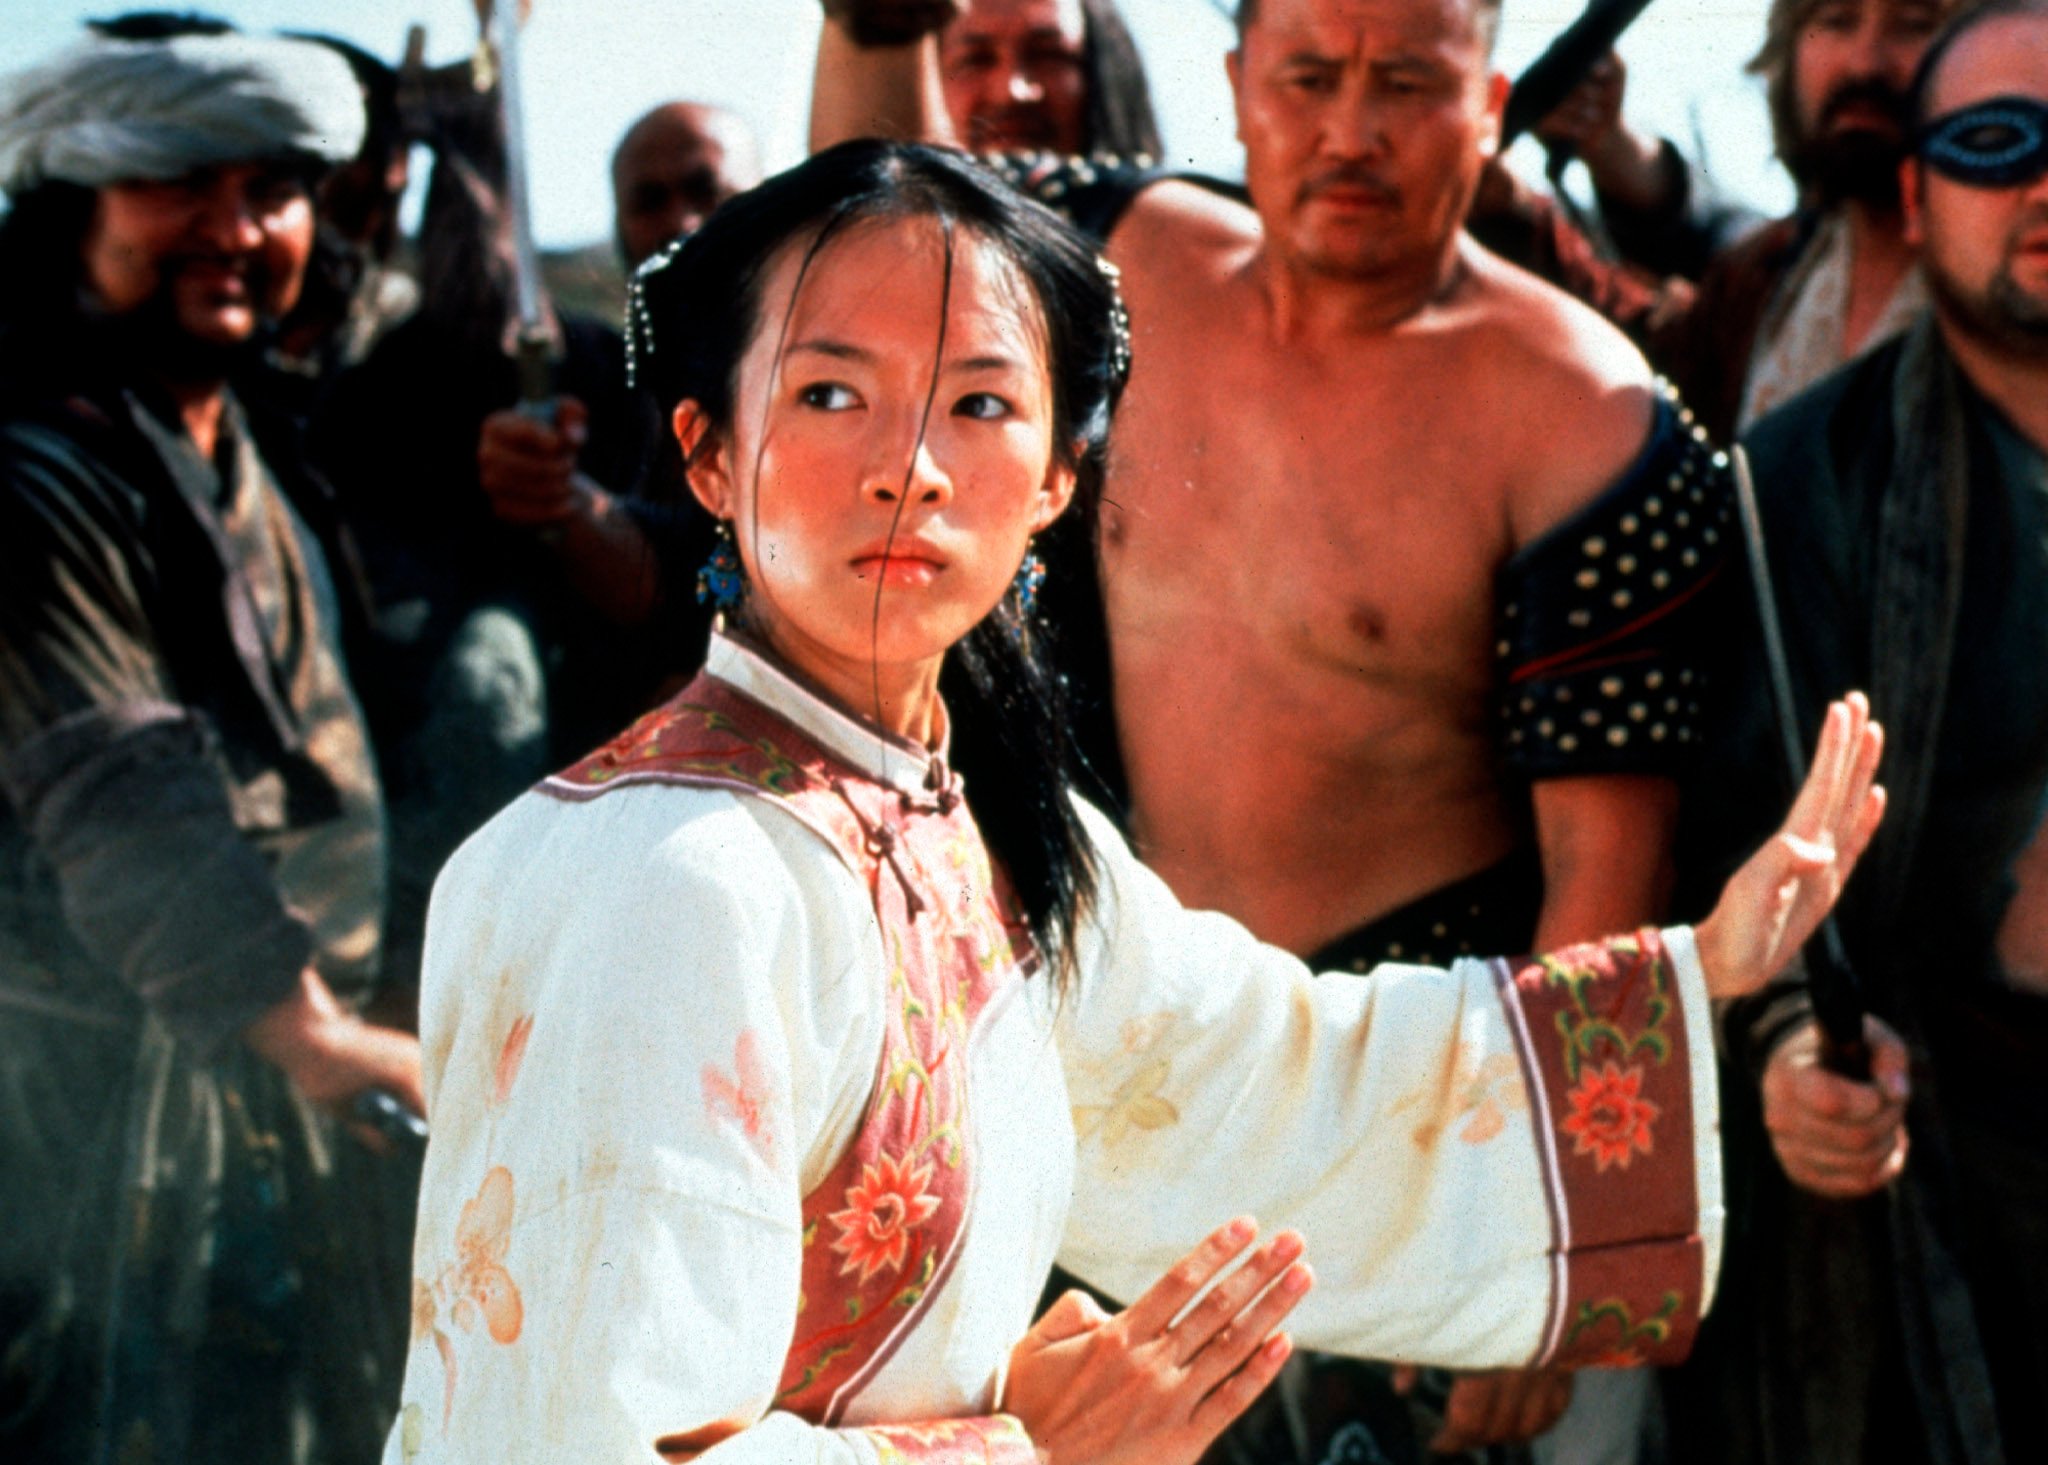 From Zhang Ziyi (above), Michelle Yeoh and Cheng Pei-pei, who all featured in Crouching Tiger, Hidden Dragon, to Maggie Cheung and Brigitte Lin, we look at the best female martial arts movie stars. Photo: Reuters